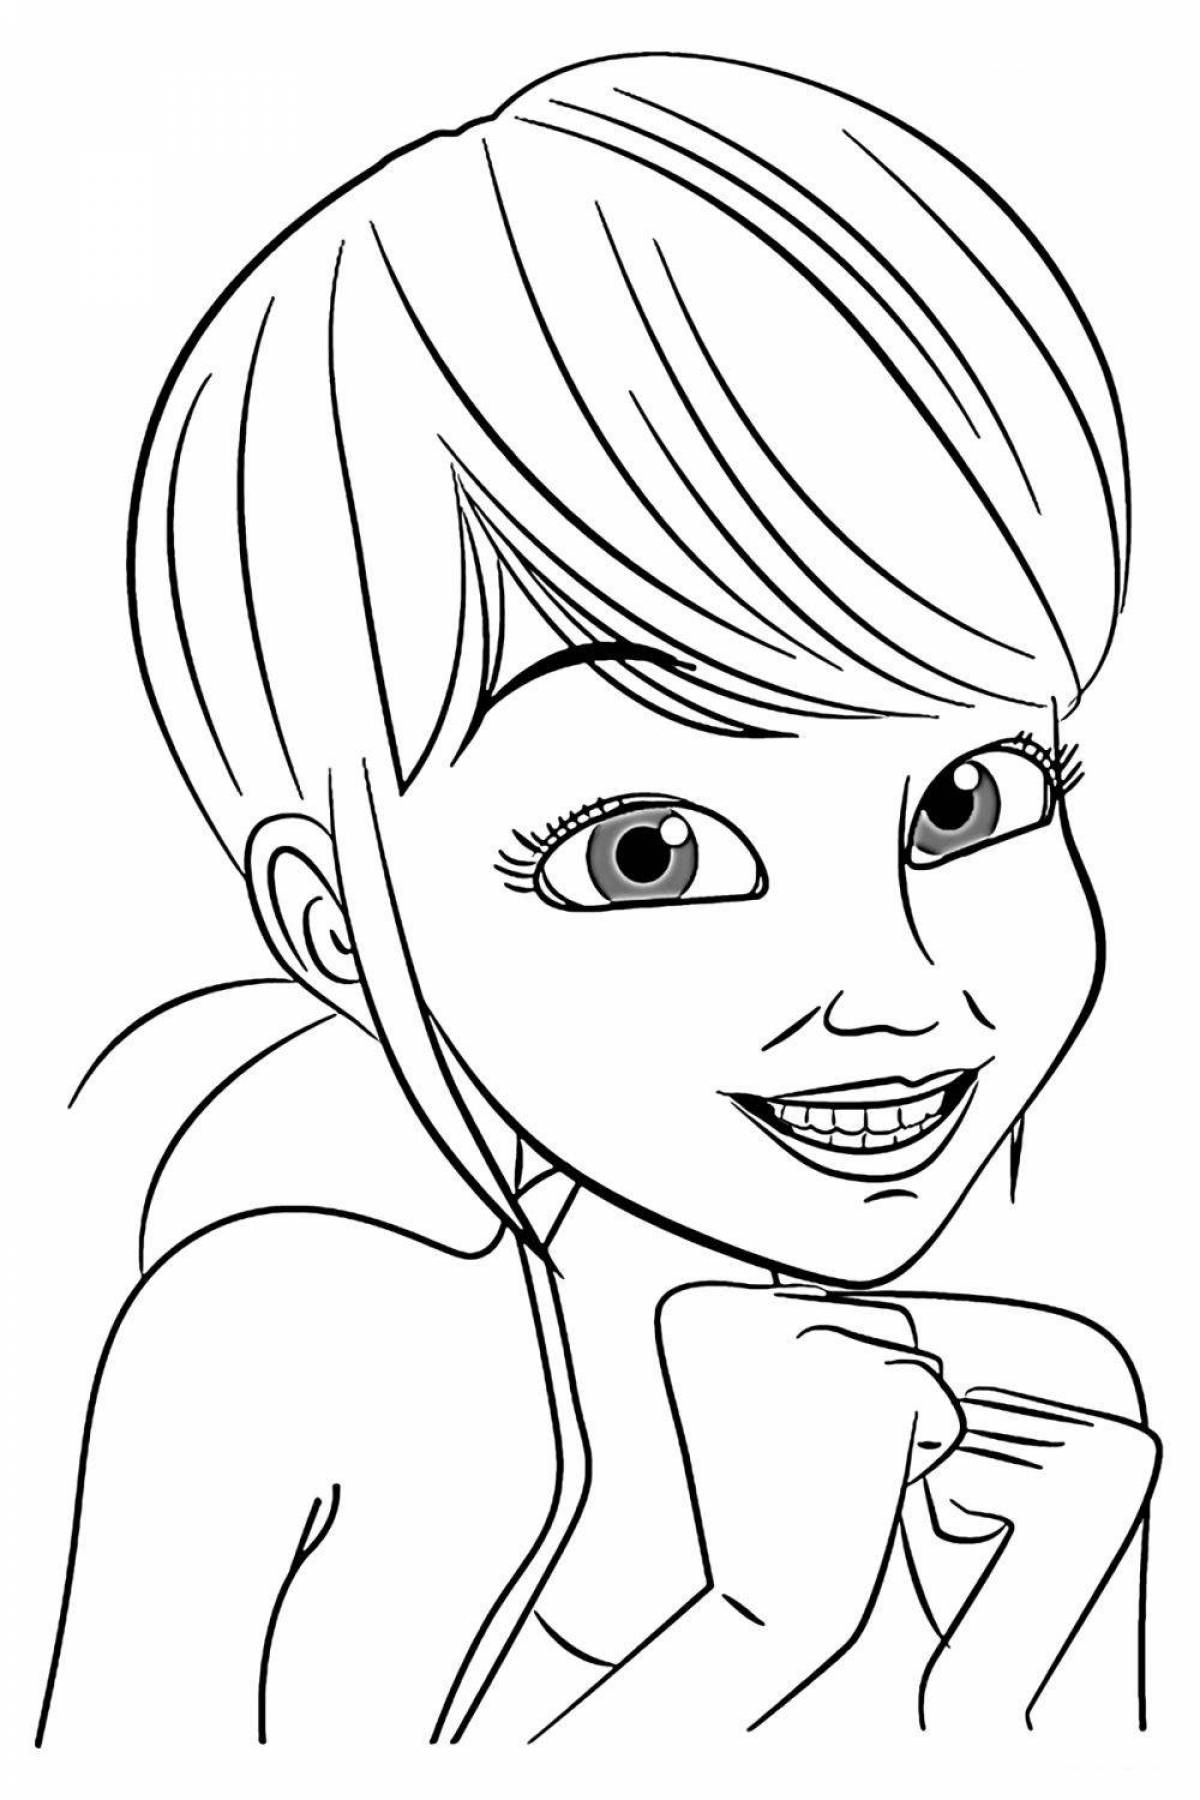 Charming marinette coloring book